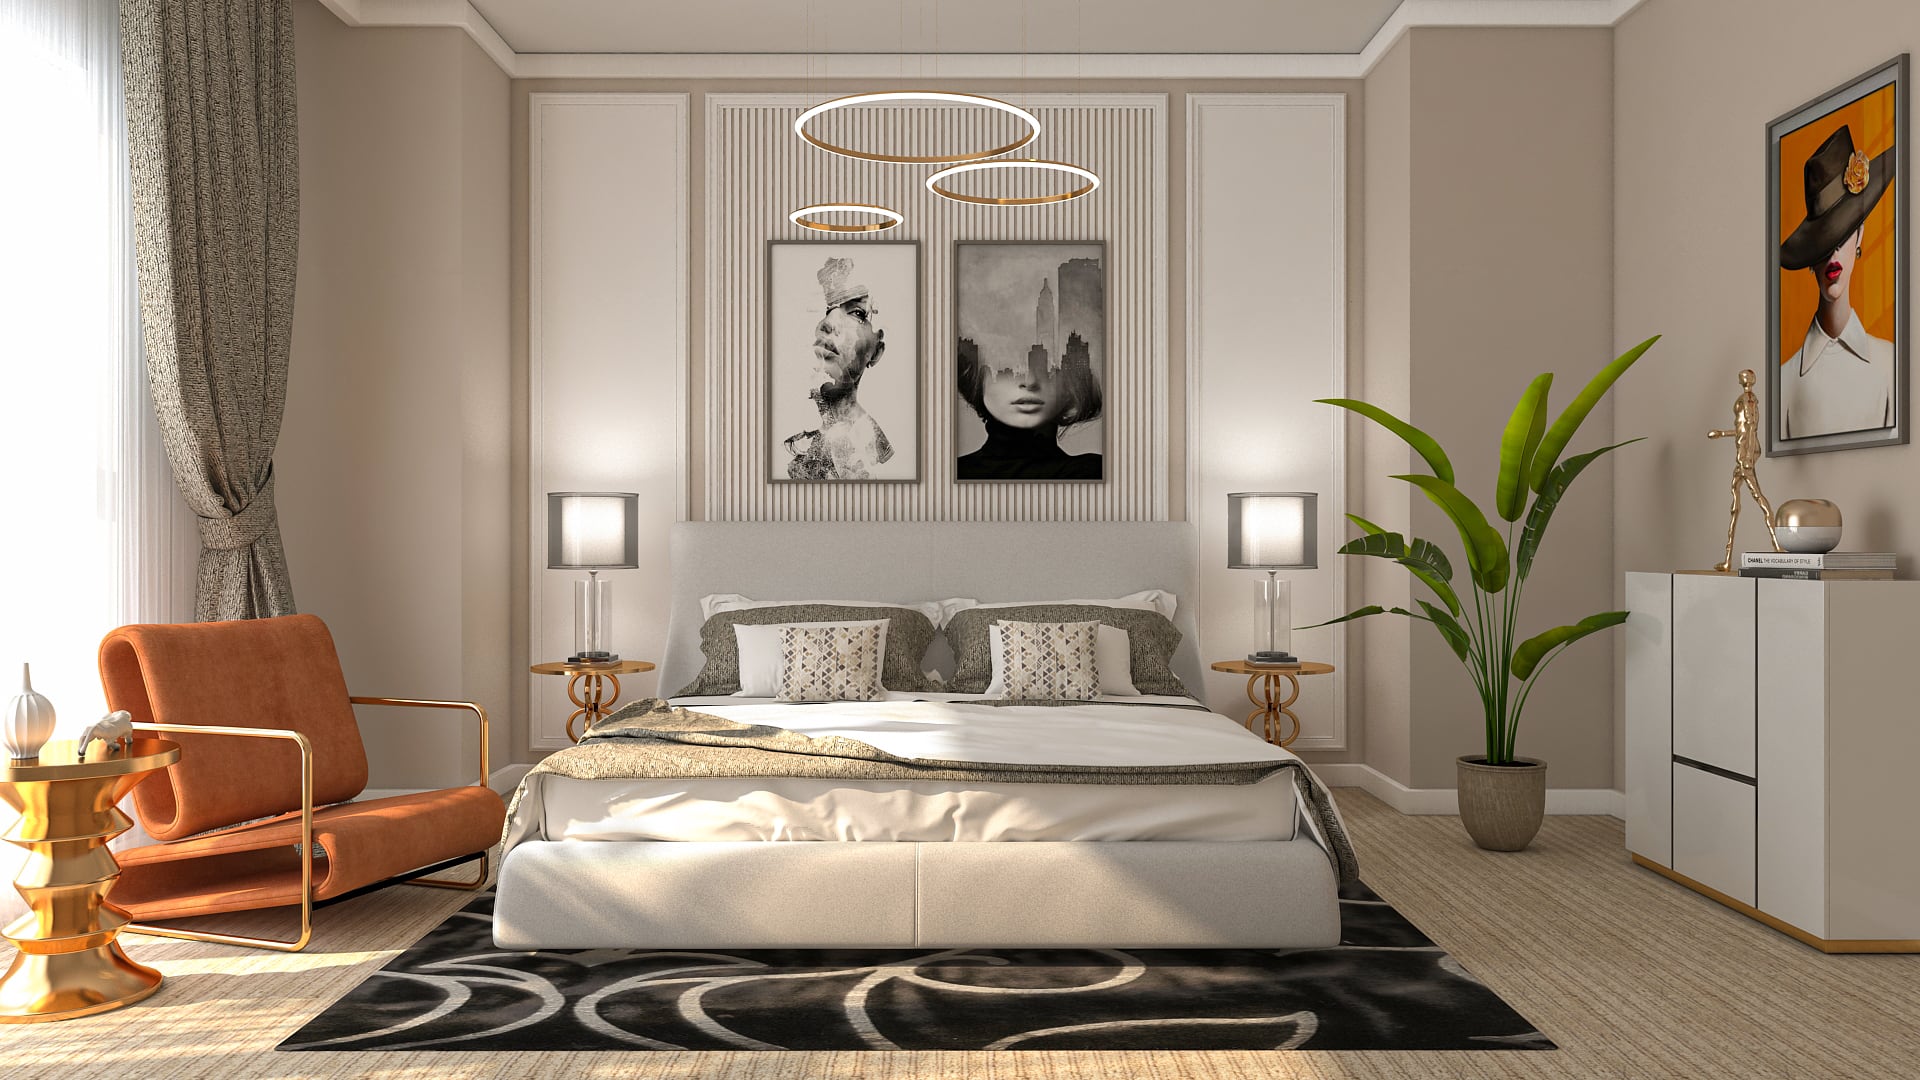 Modern Bedroom With Art Deco Flair